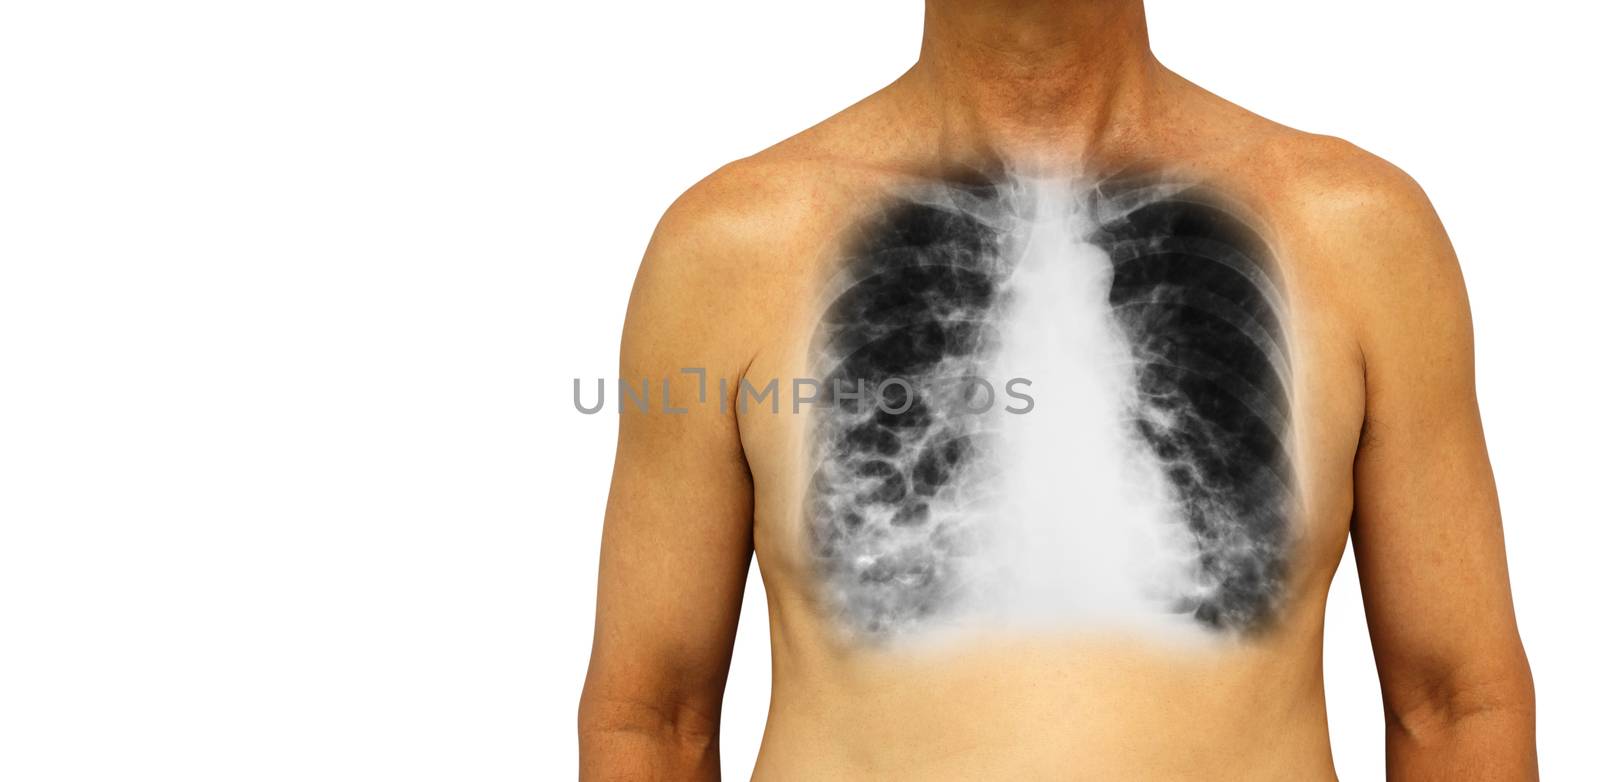 Bronchiectasis . Human chest with x-ray chest show multiple lung bleb and cyst due to chronic infection . Isolated background . Blank area at Left side .